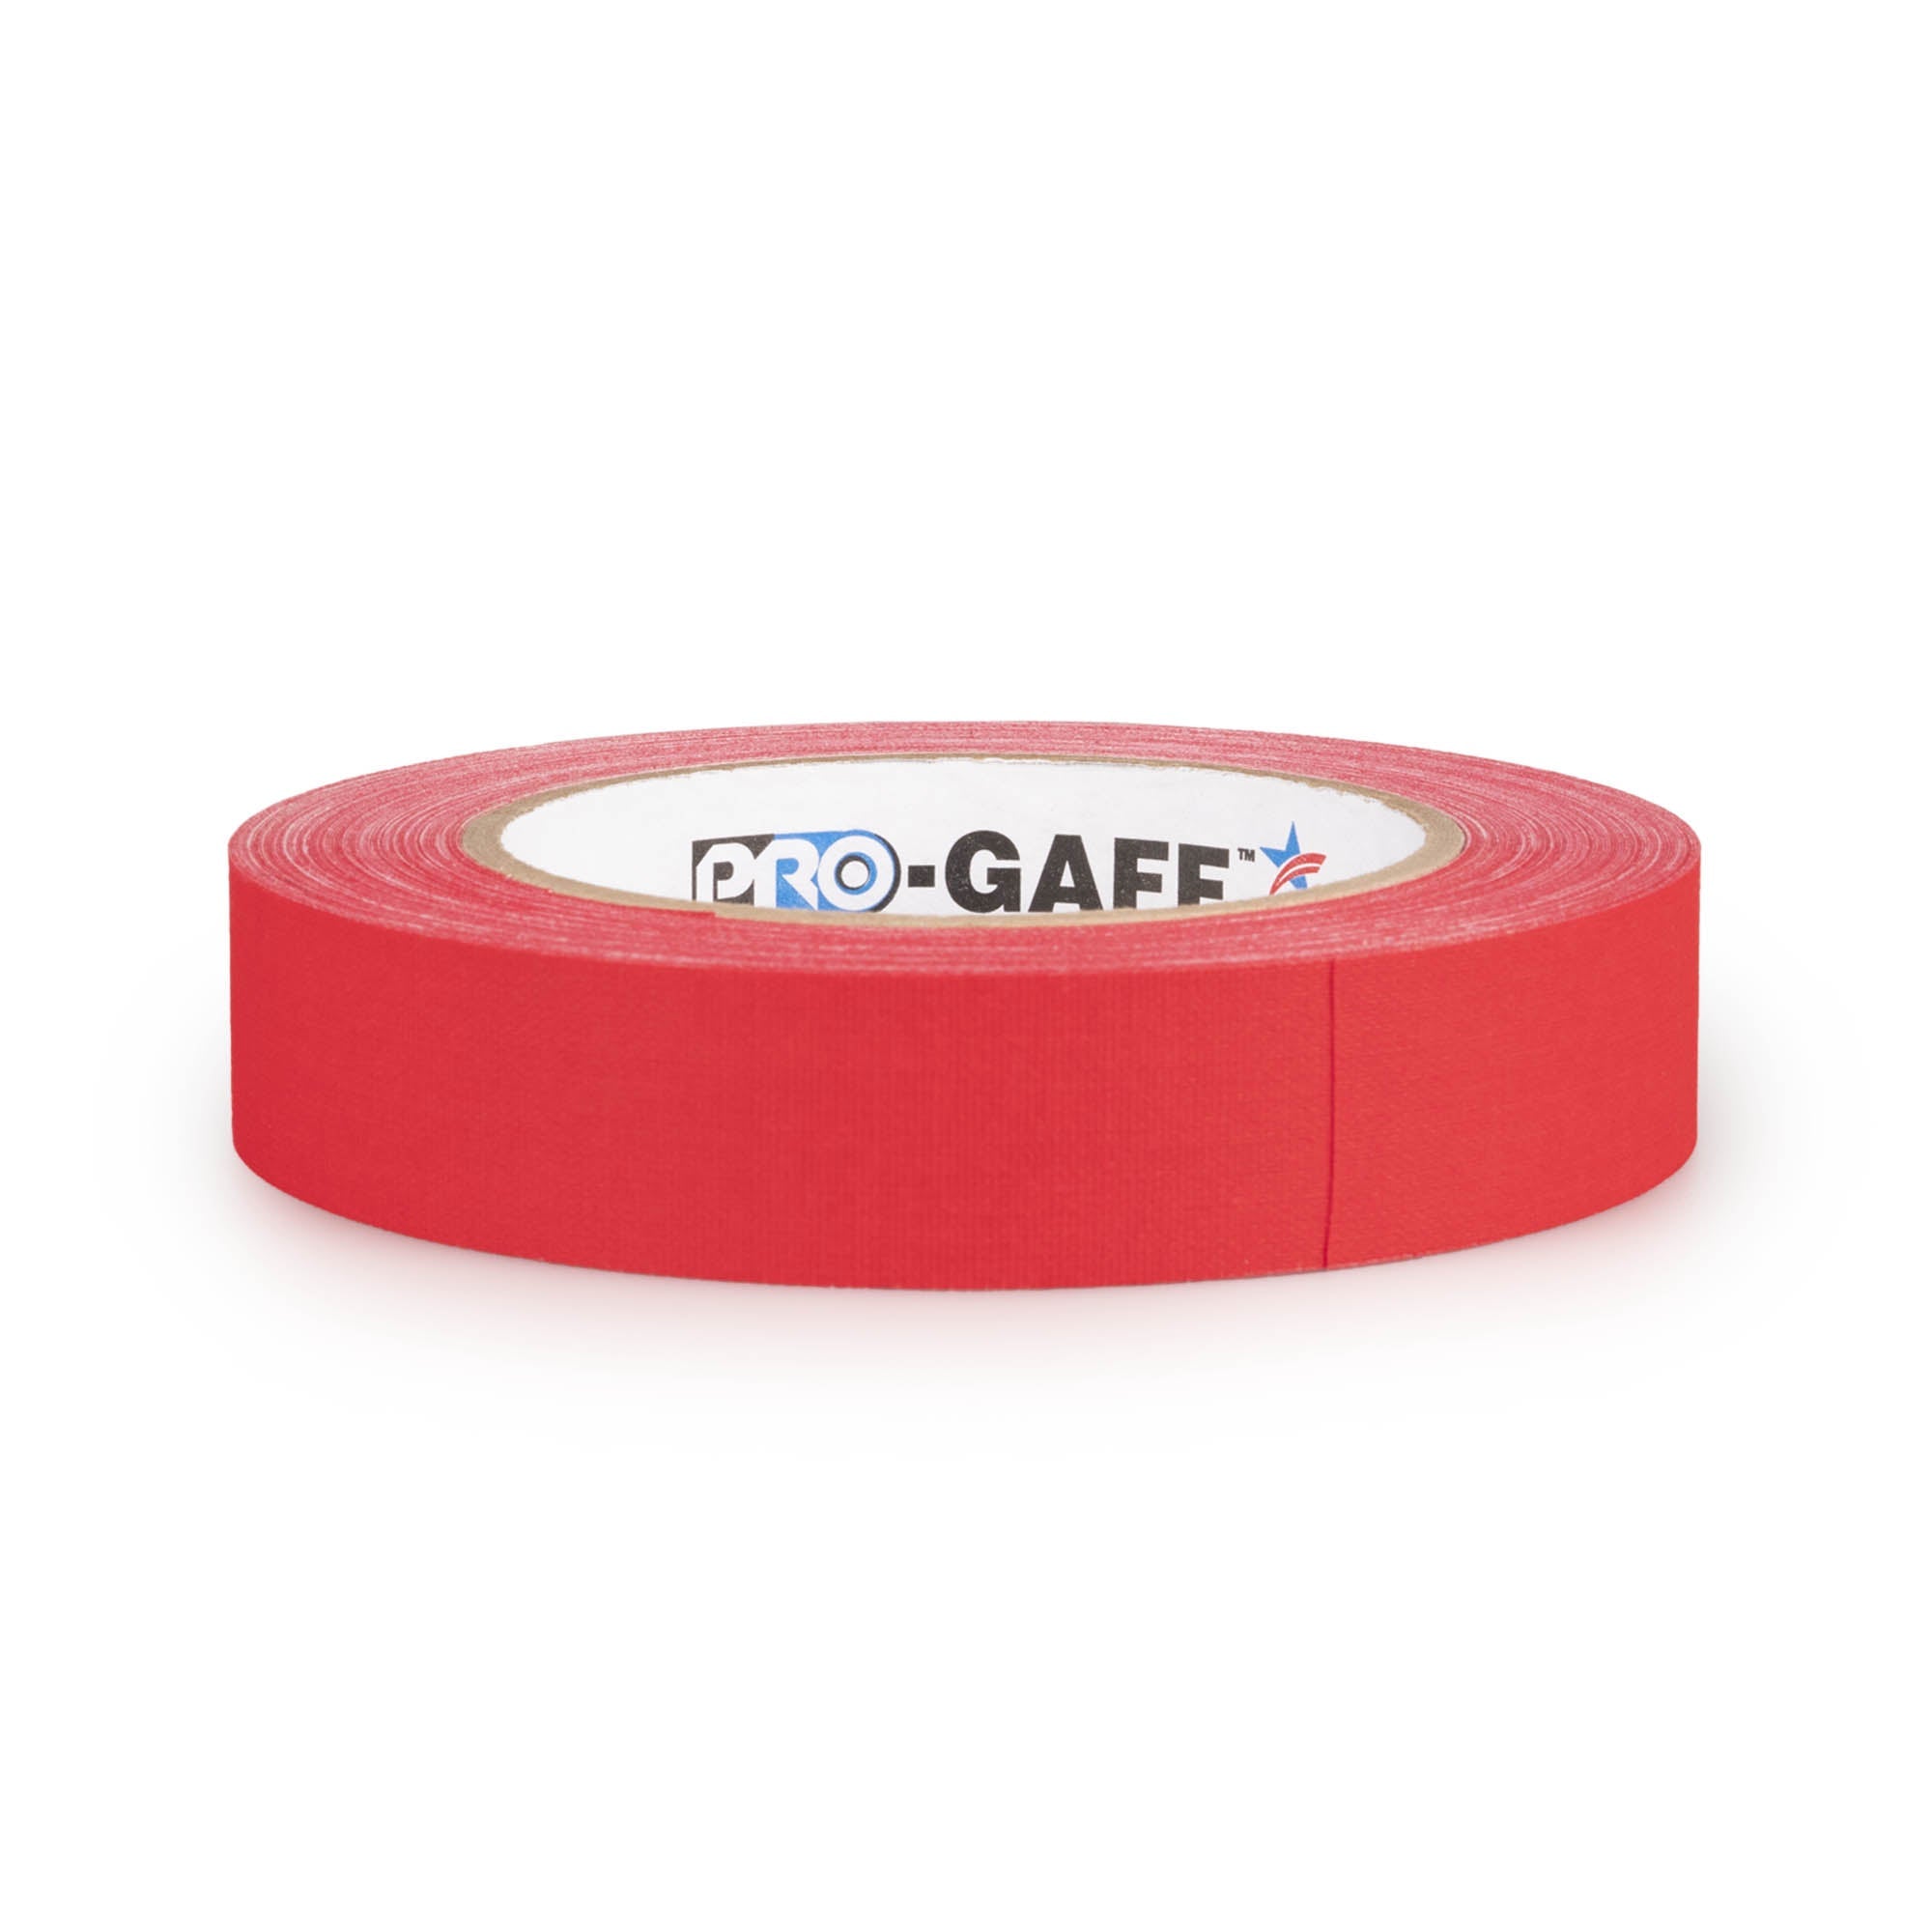 25m roll of pro gaff fabric adhesive tape in red laying in a white background